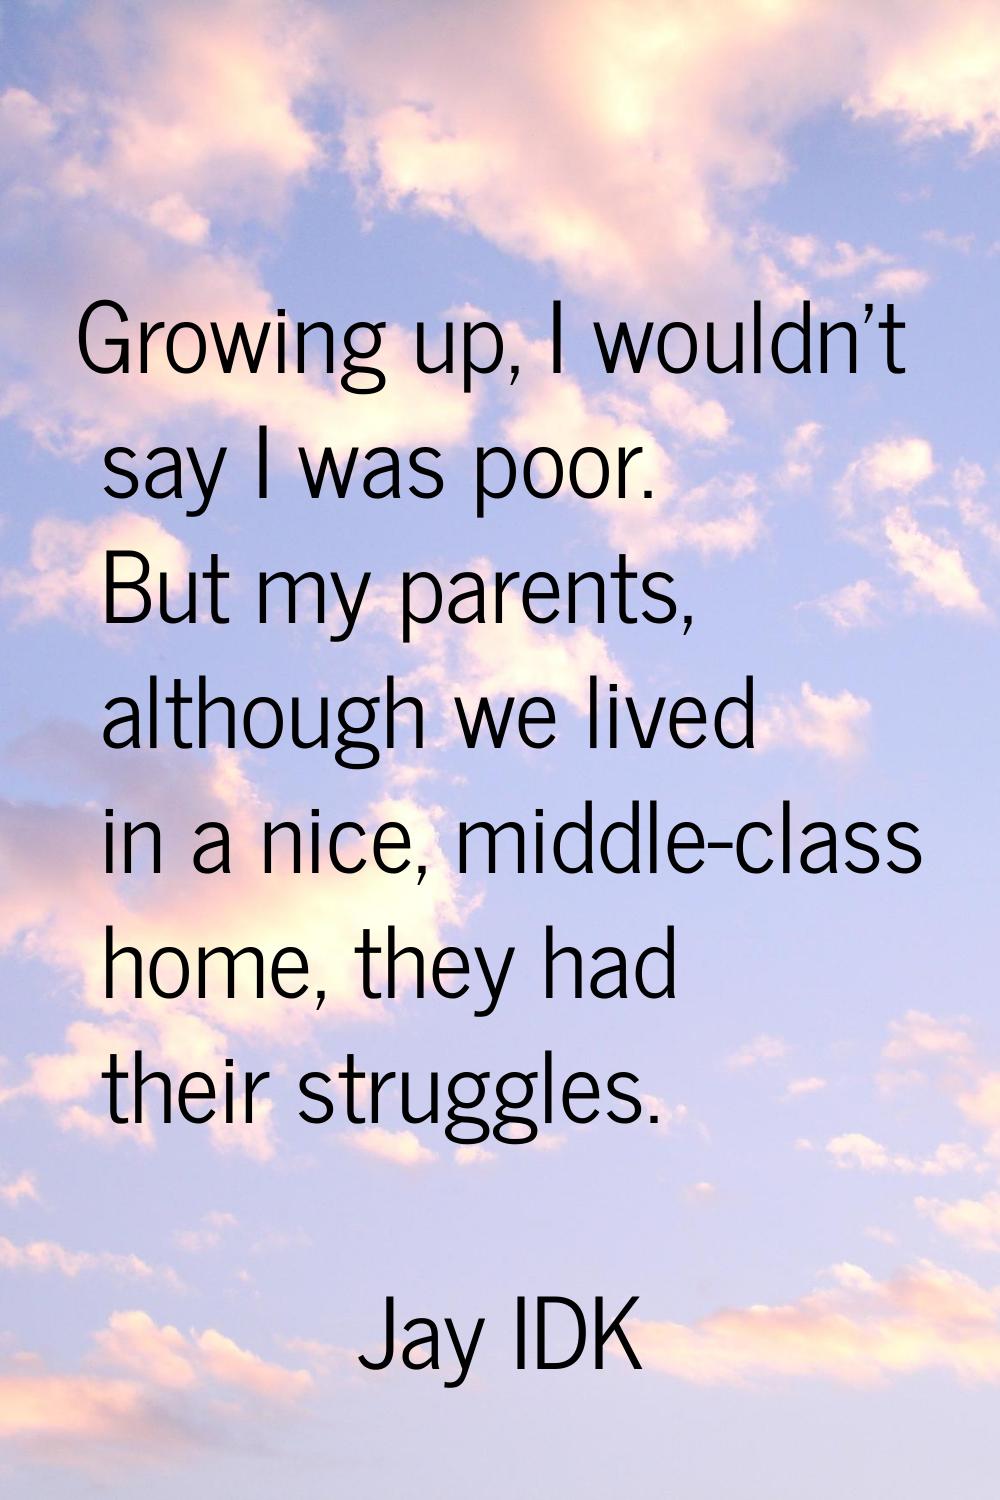 Growing up, I wouldn't say I was poor. But my parents, although we lived in a nice, middle-class ho